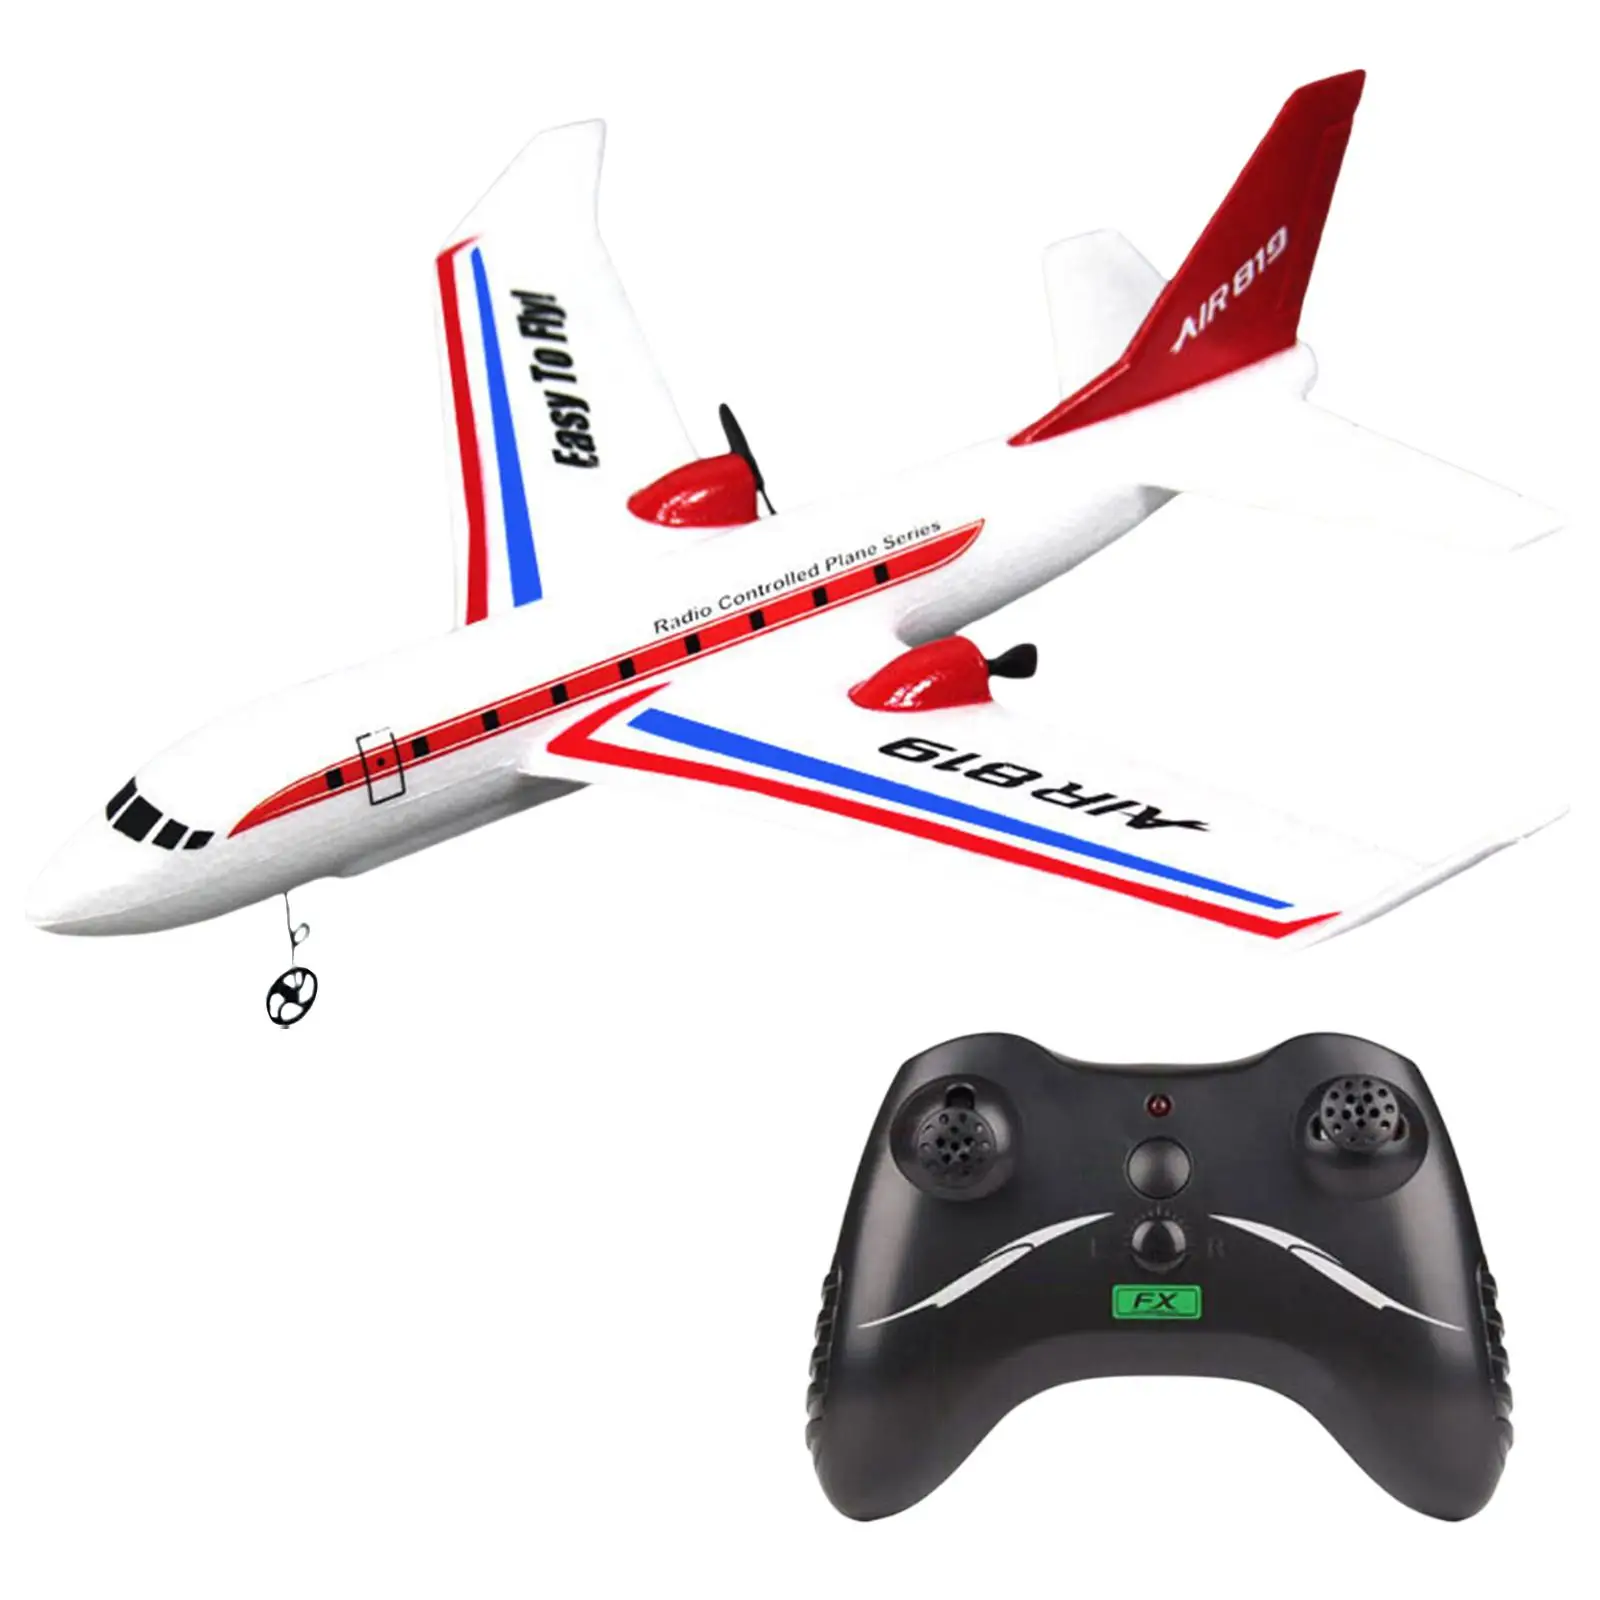 Remote Control Plane Toy Flight Time:15-20 Minutes Ready to Fly for Adults